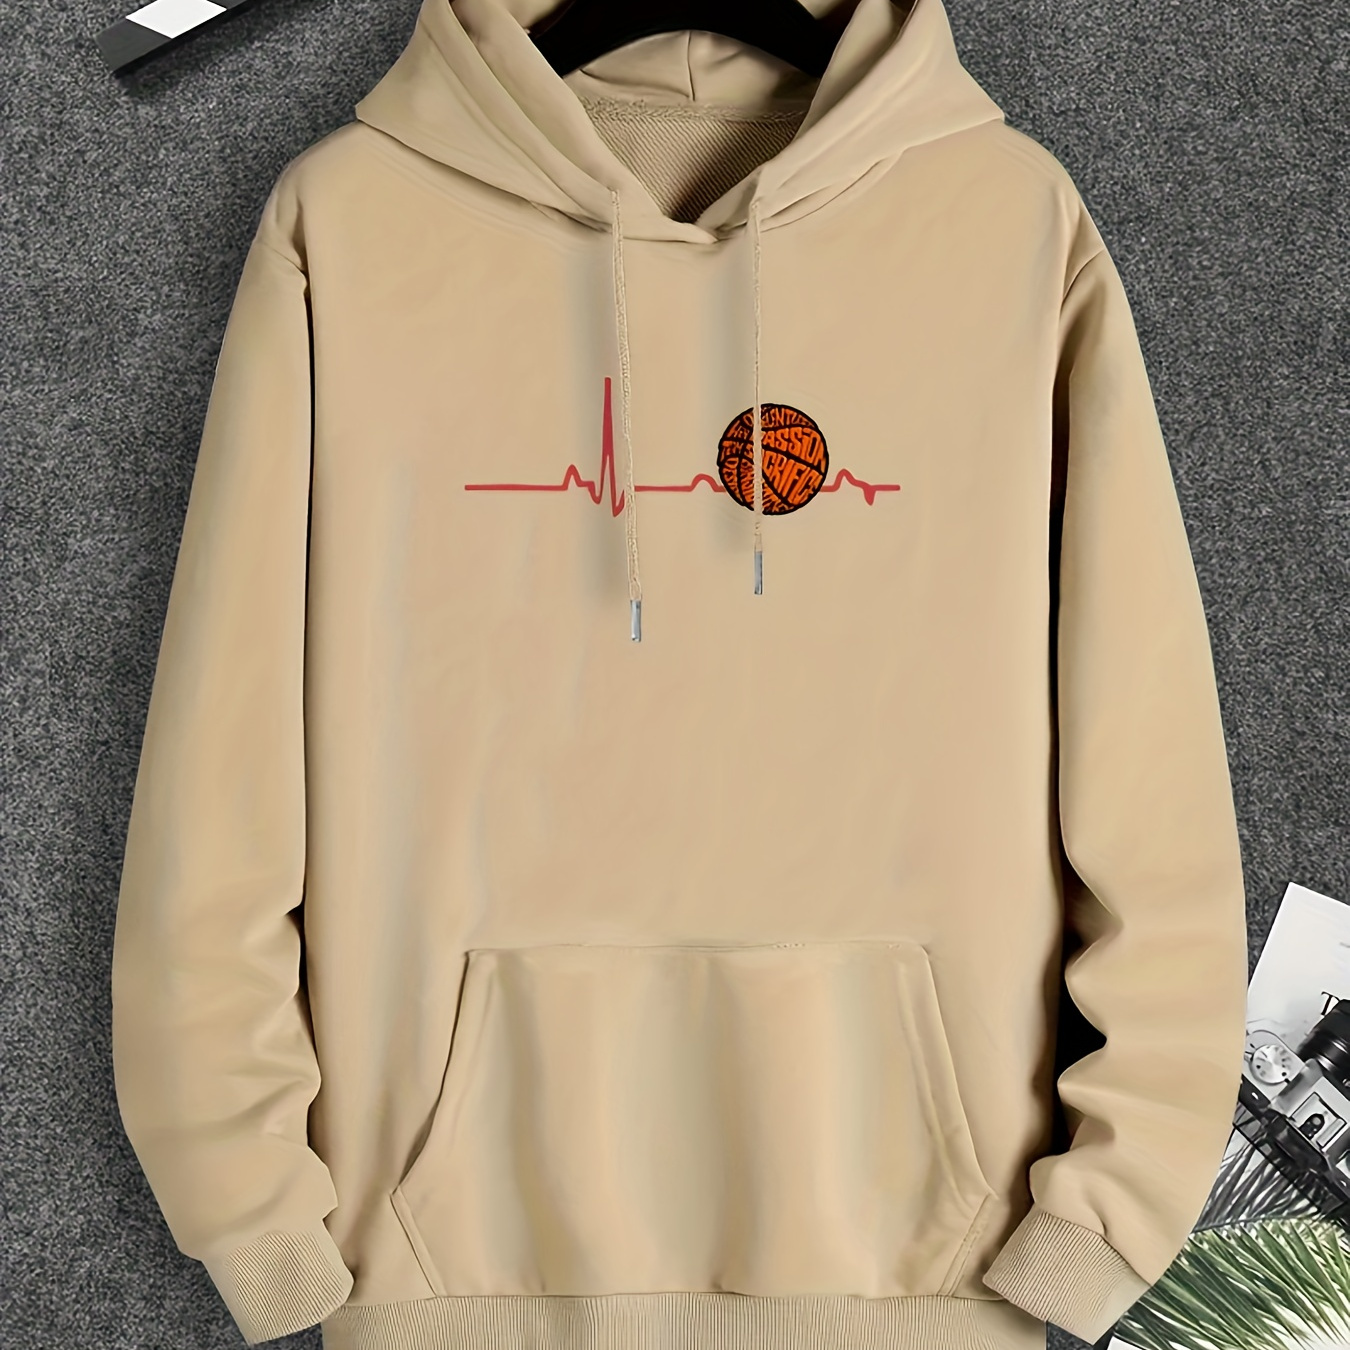 

Men's Ecg Basketball Print Hoodie, Casual Loose Hooded Long Sleeve Slightly Stretch Pullover Sweatshirt Top, Men's Clothing For Outdoor